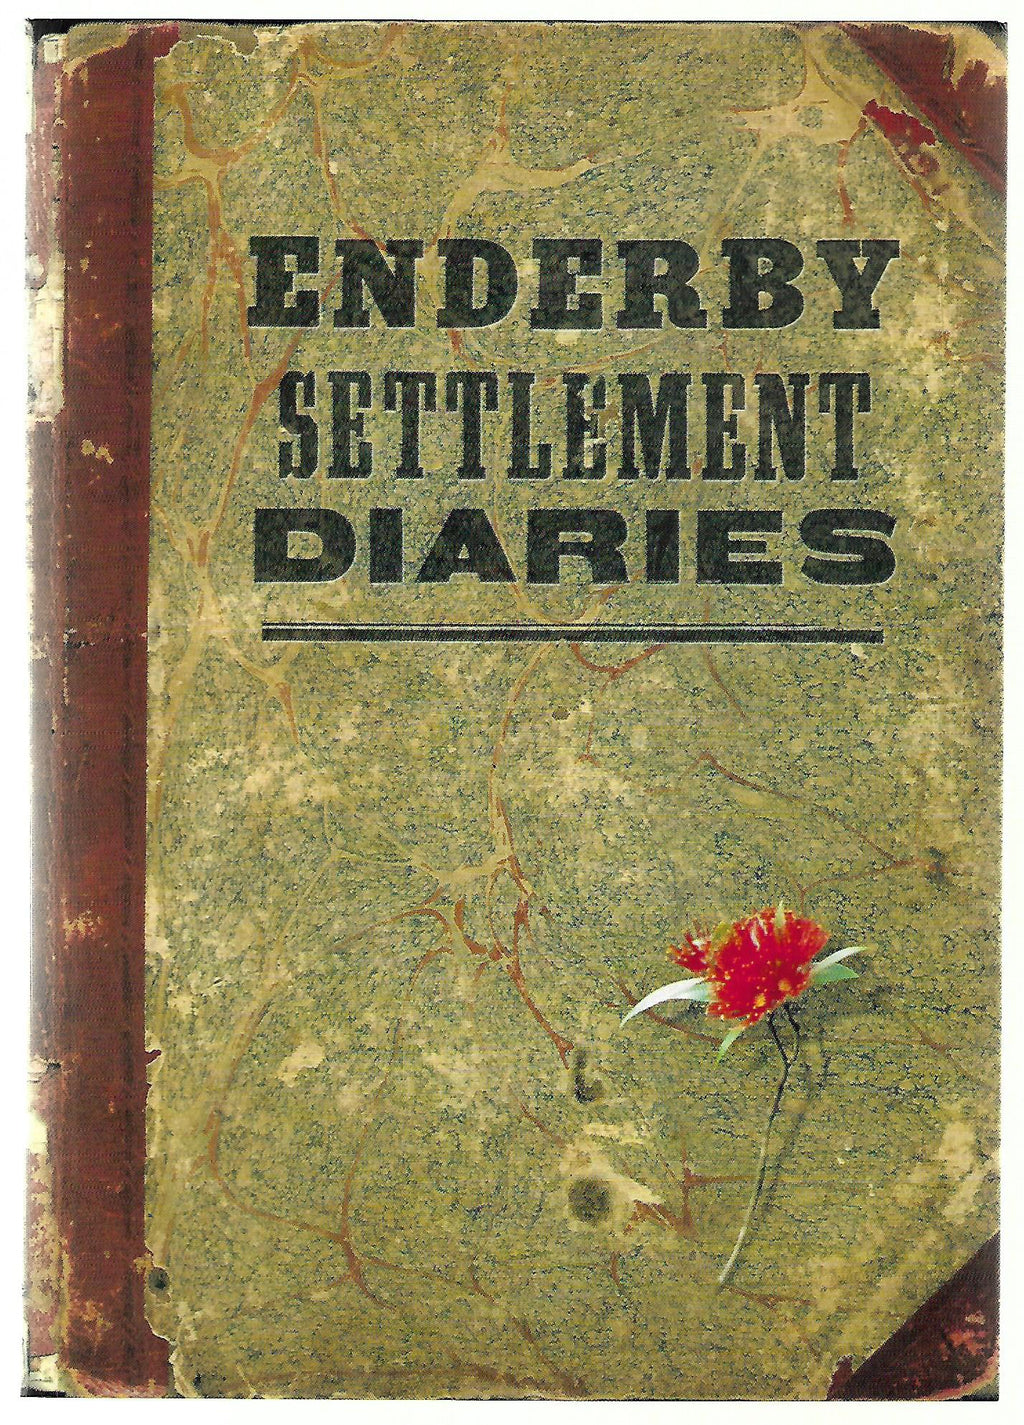 Enderby Settlement Diaries: William Mackworth and William Munce.